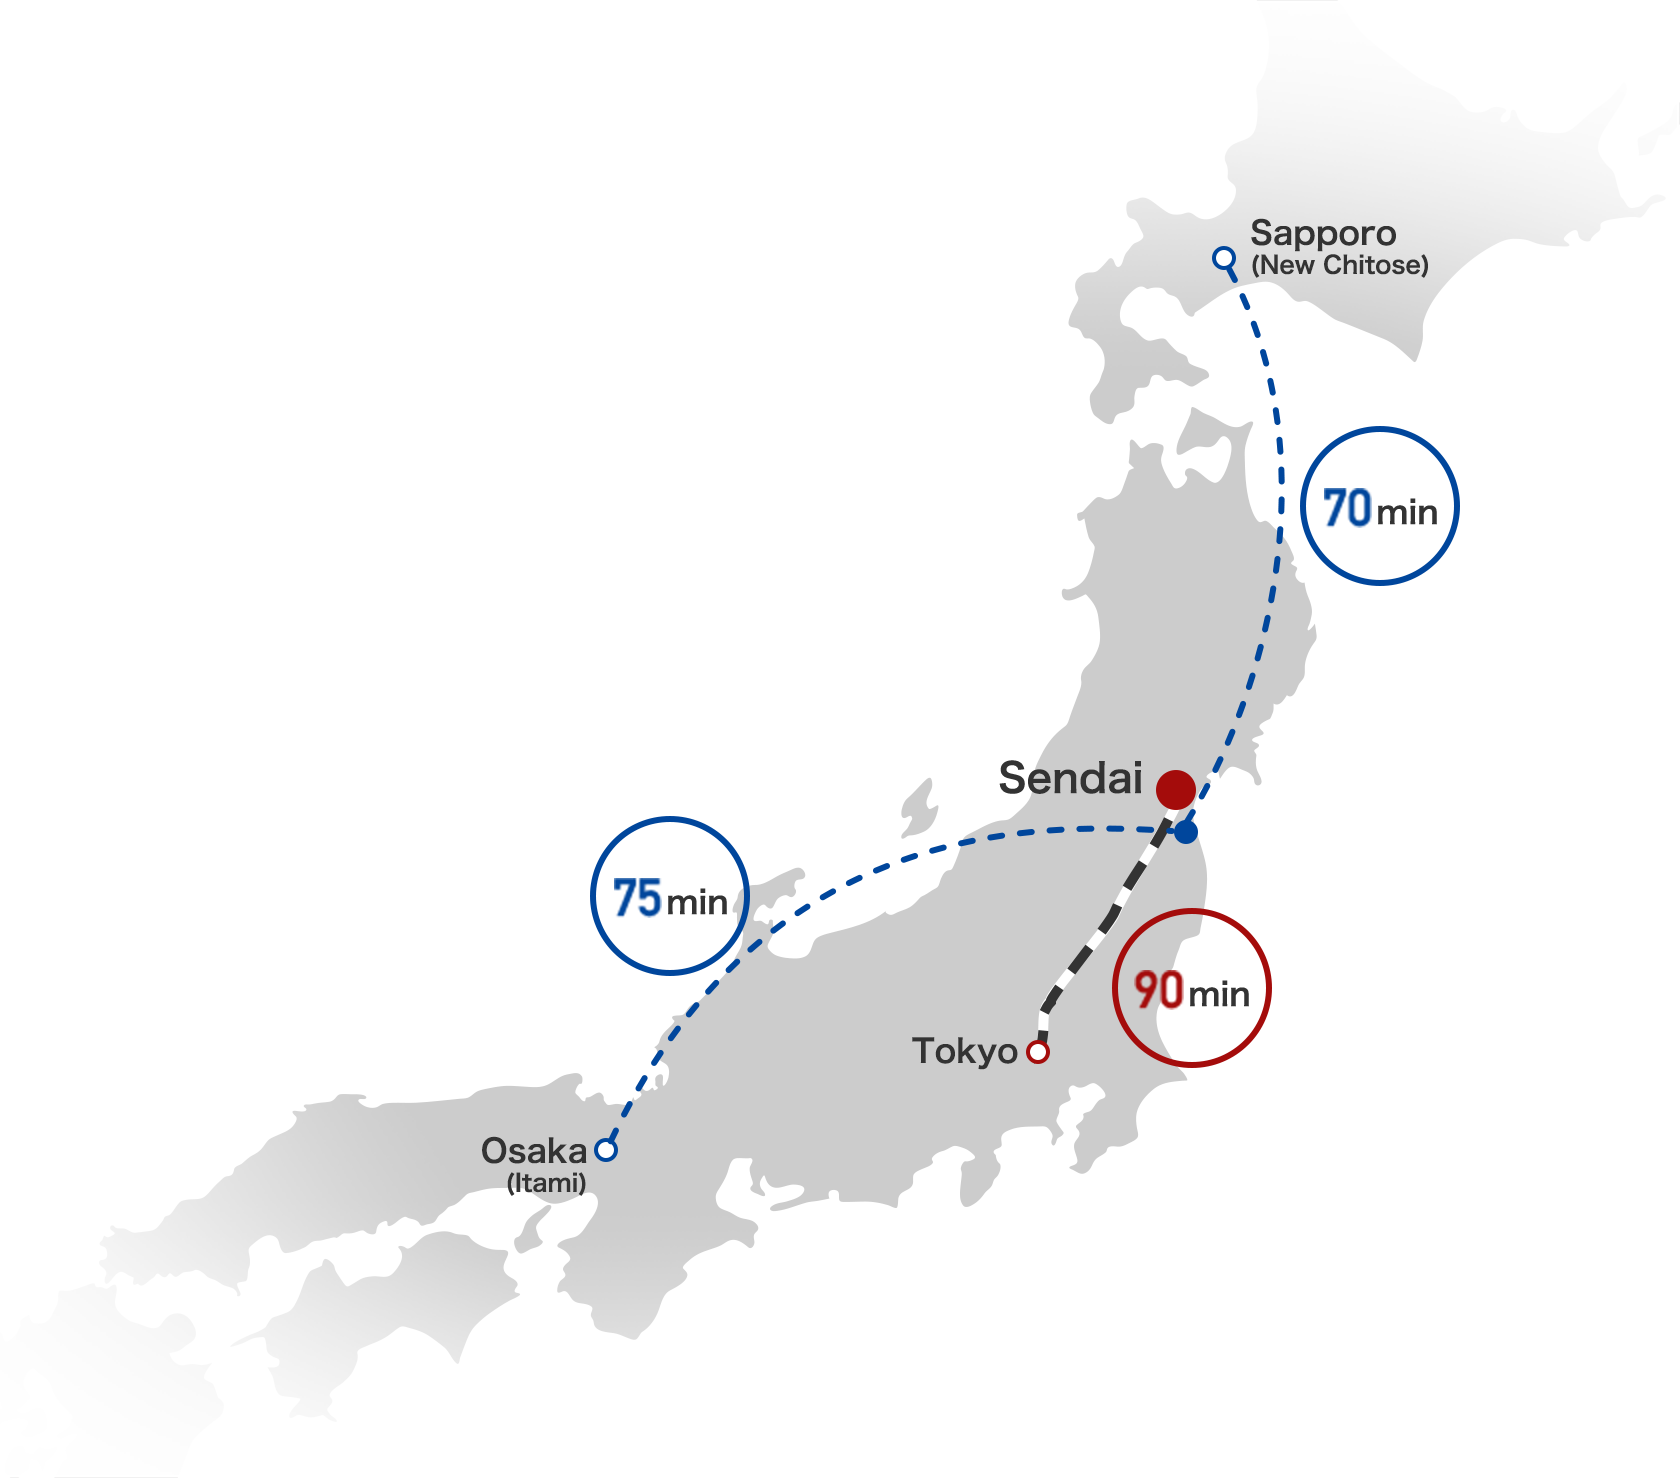 A Map Of Japan With Blue Circles And Red Dots